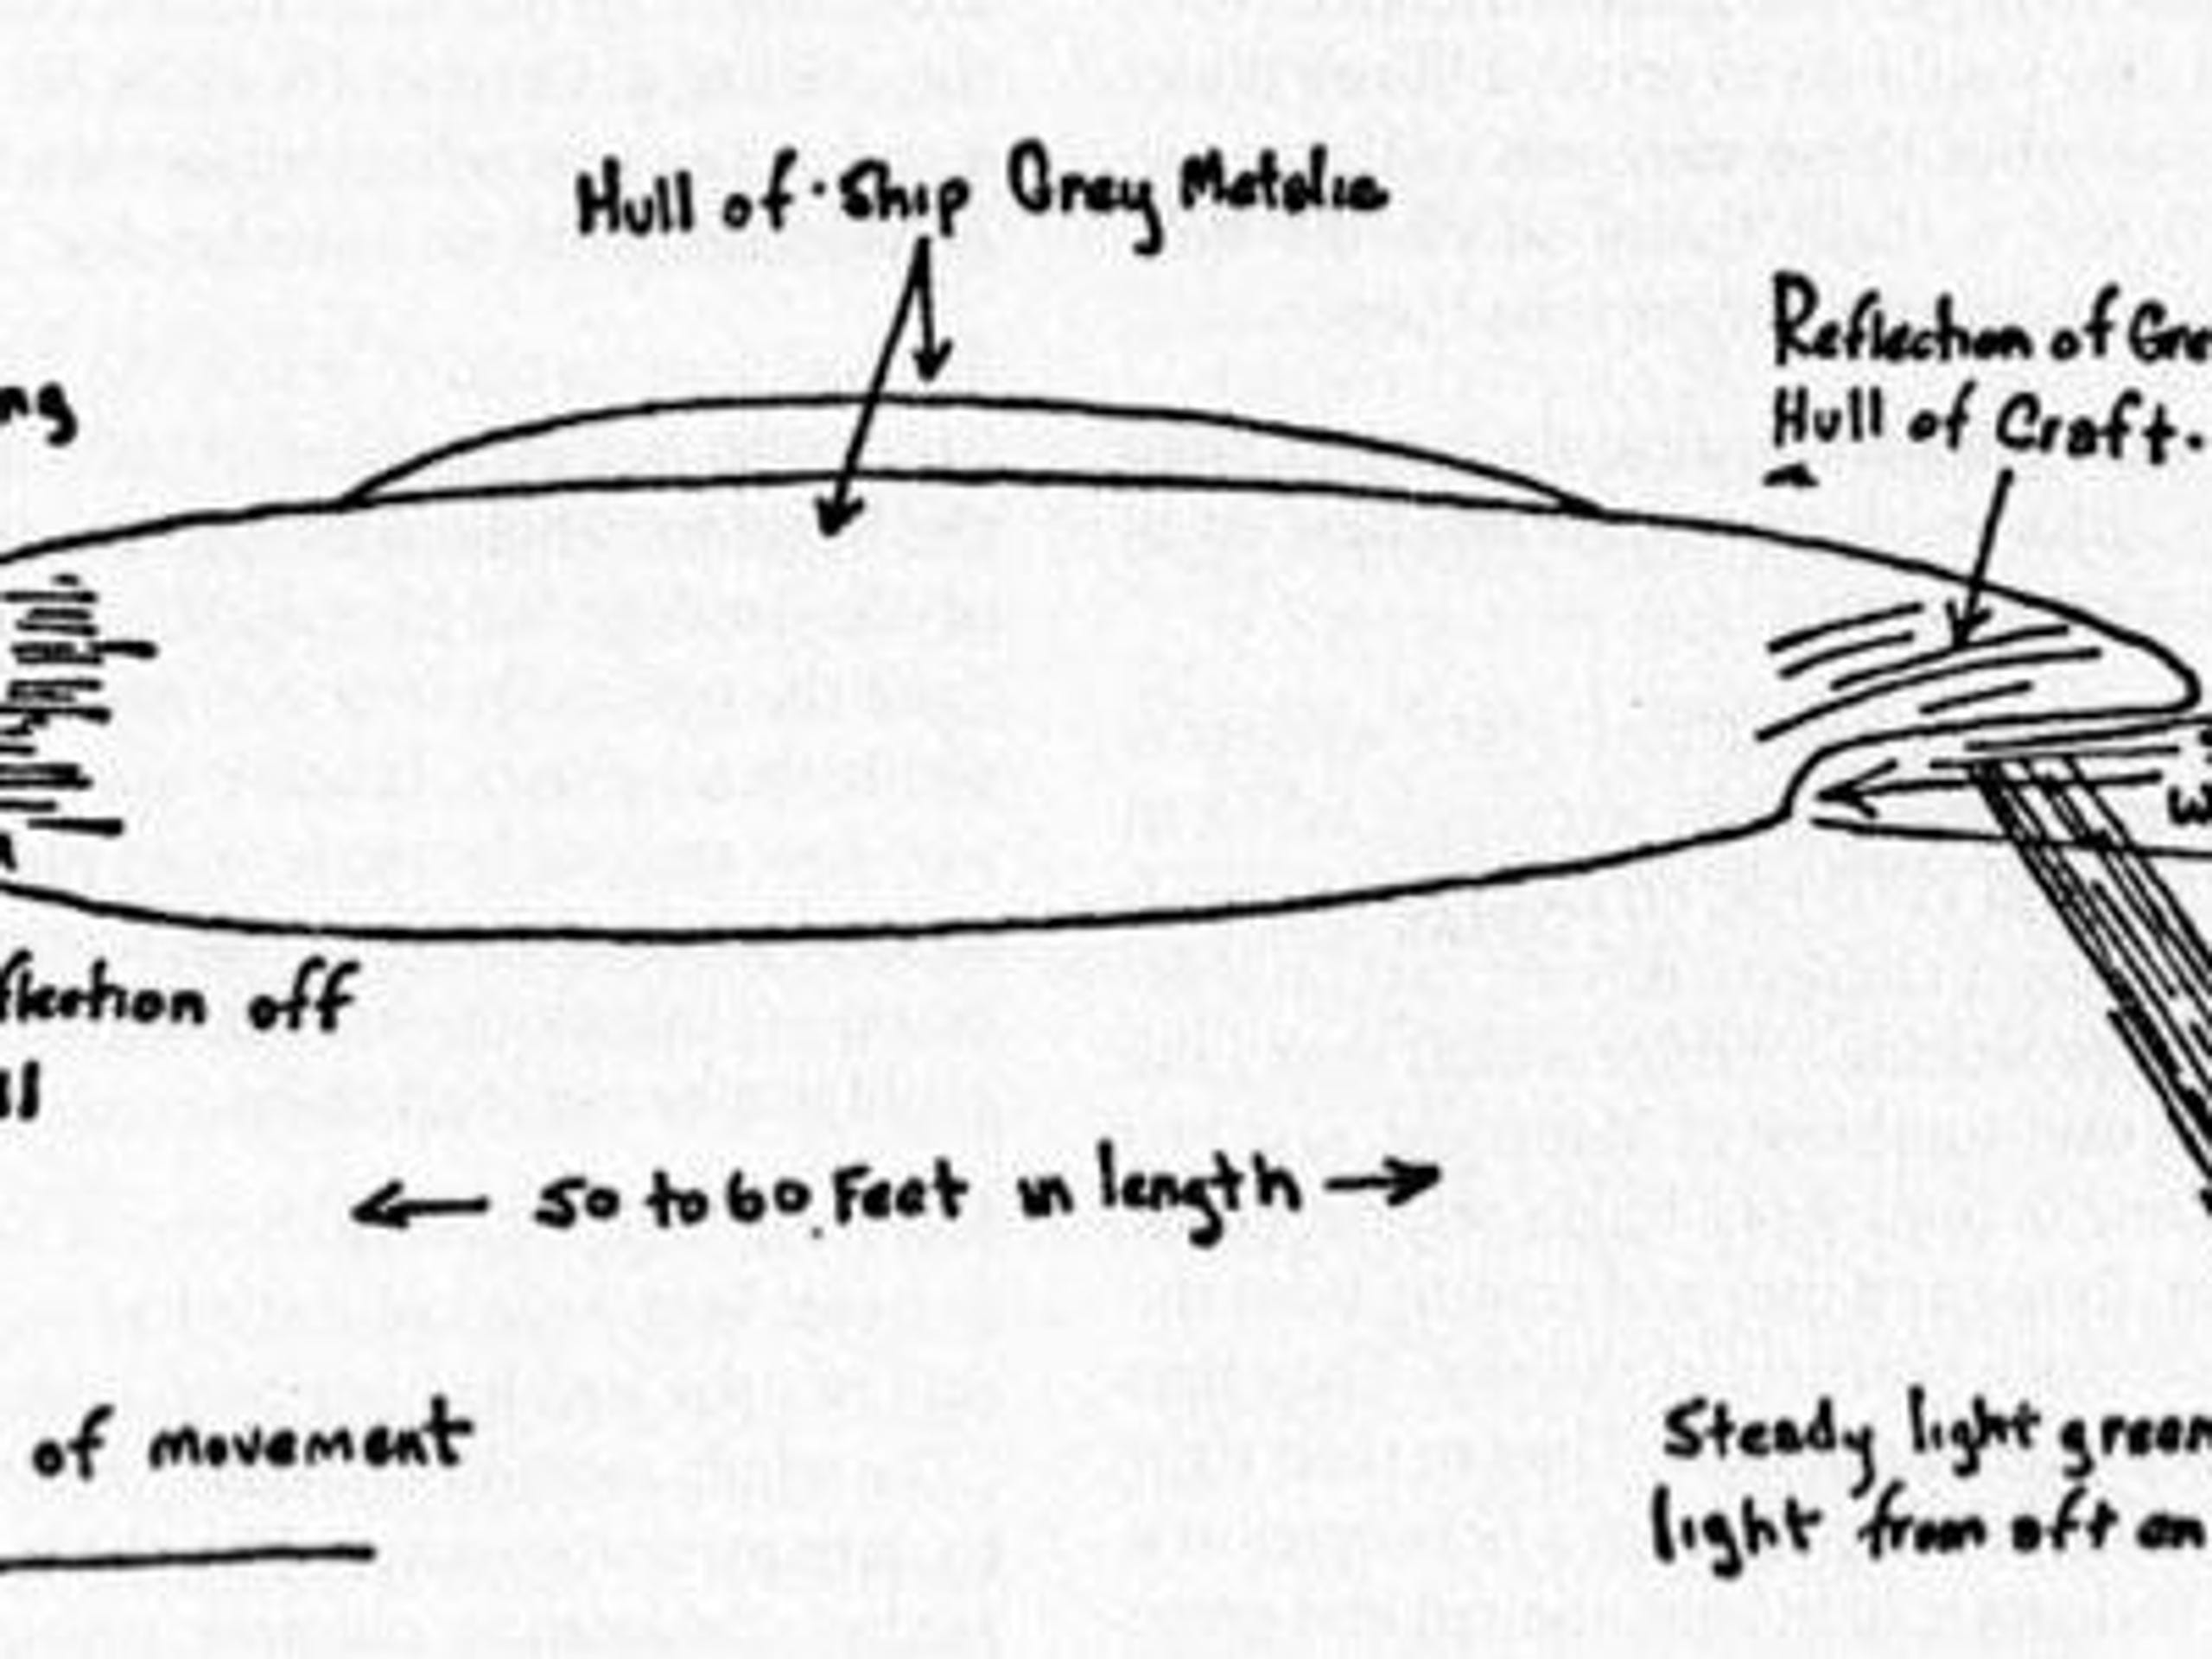 Members of the Army Reserve helicopter crew who reportedly encountered a UFO in October 1973 drew this diagram of the object they witnessed.